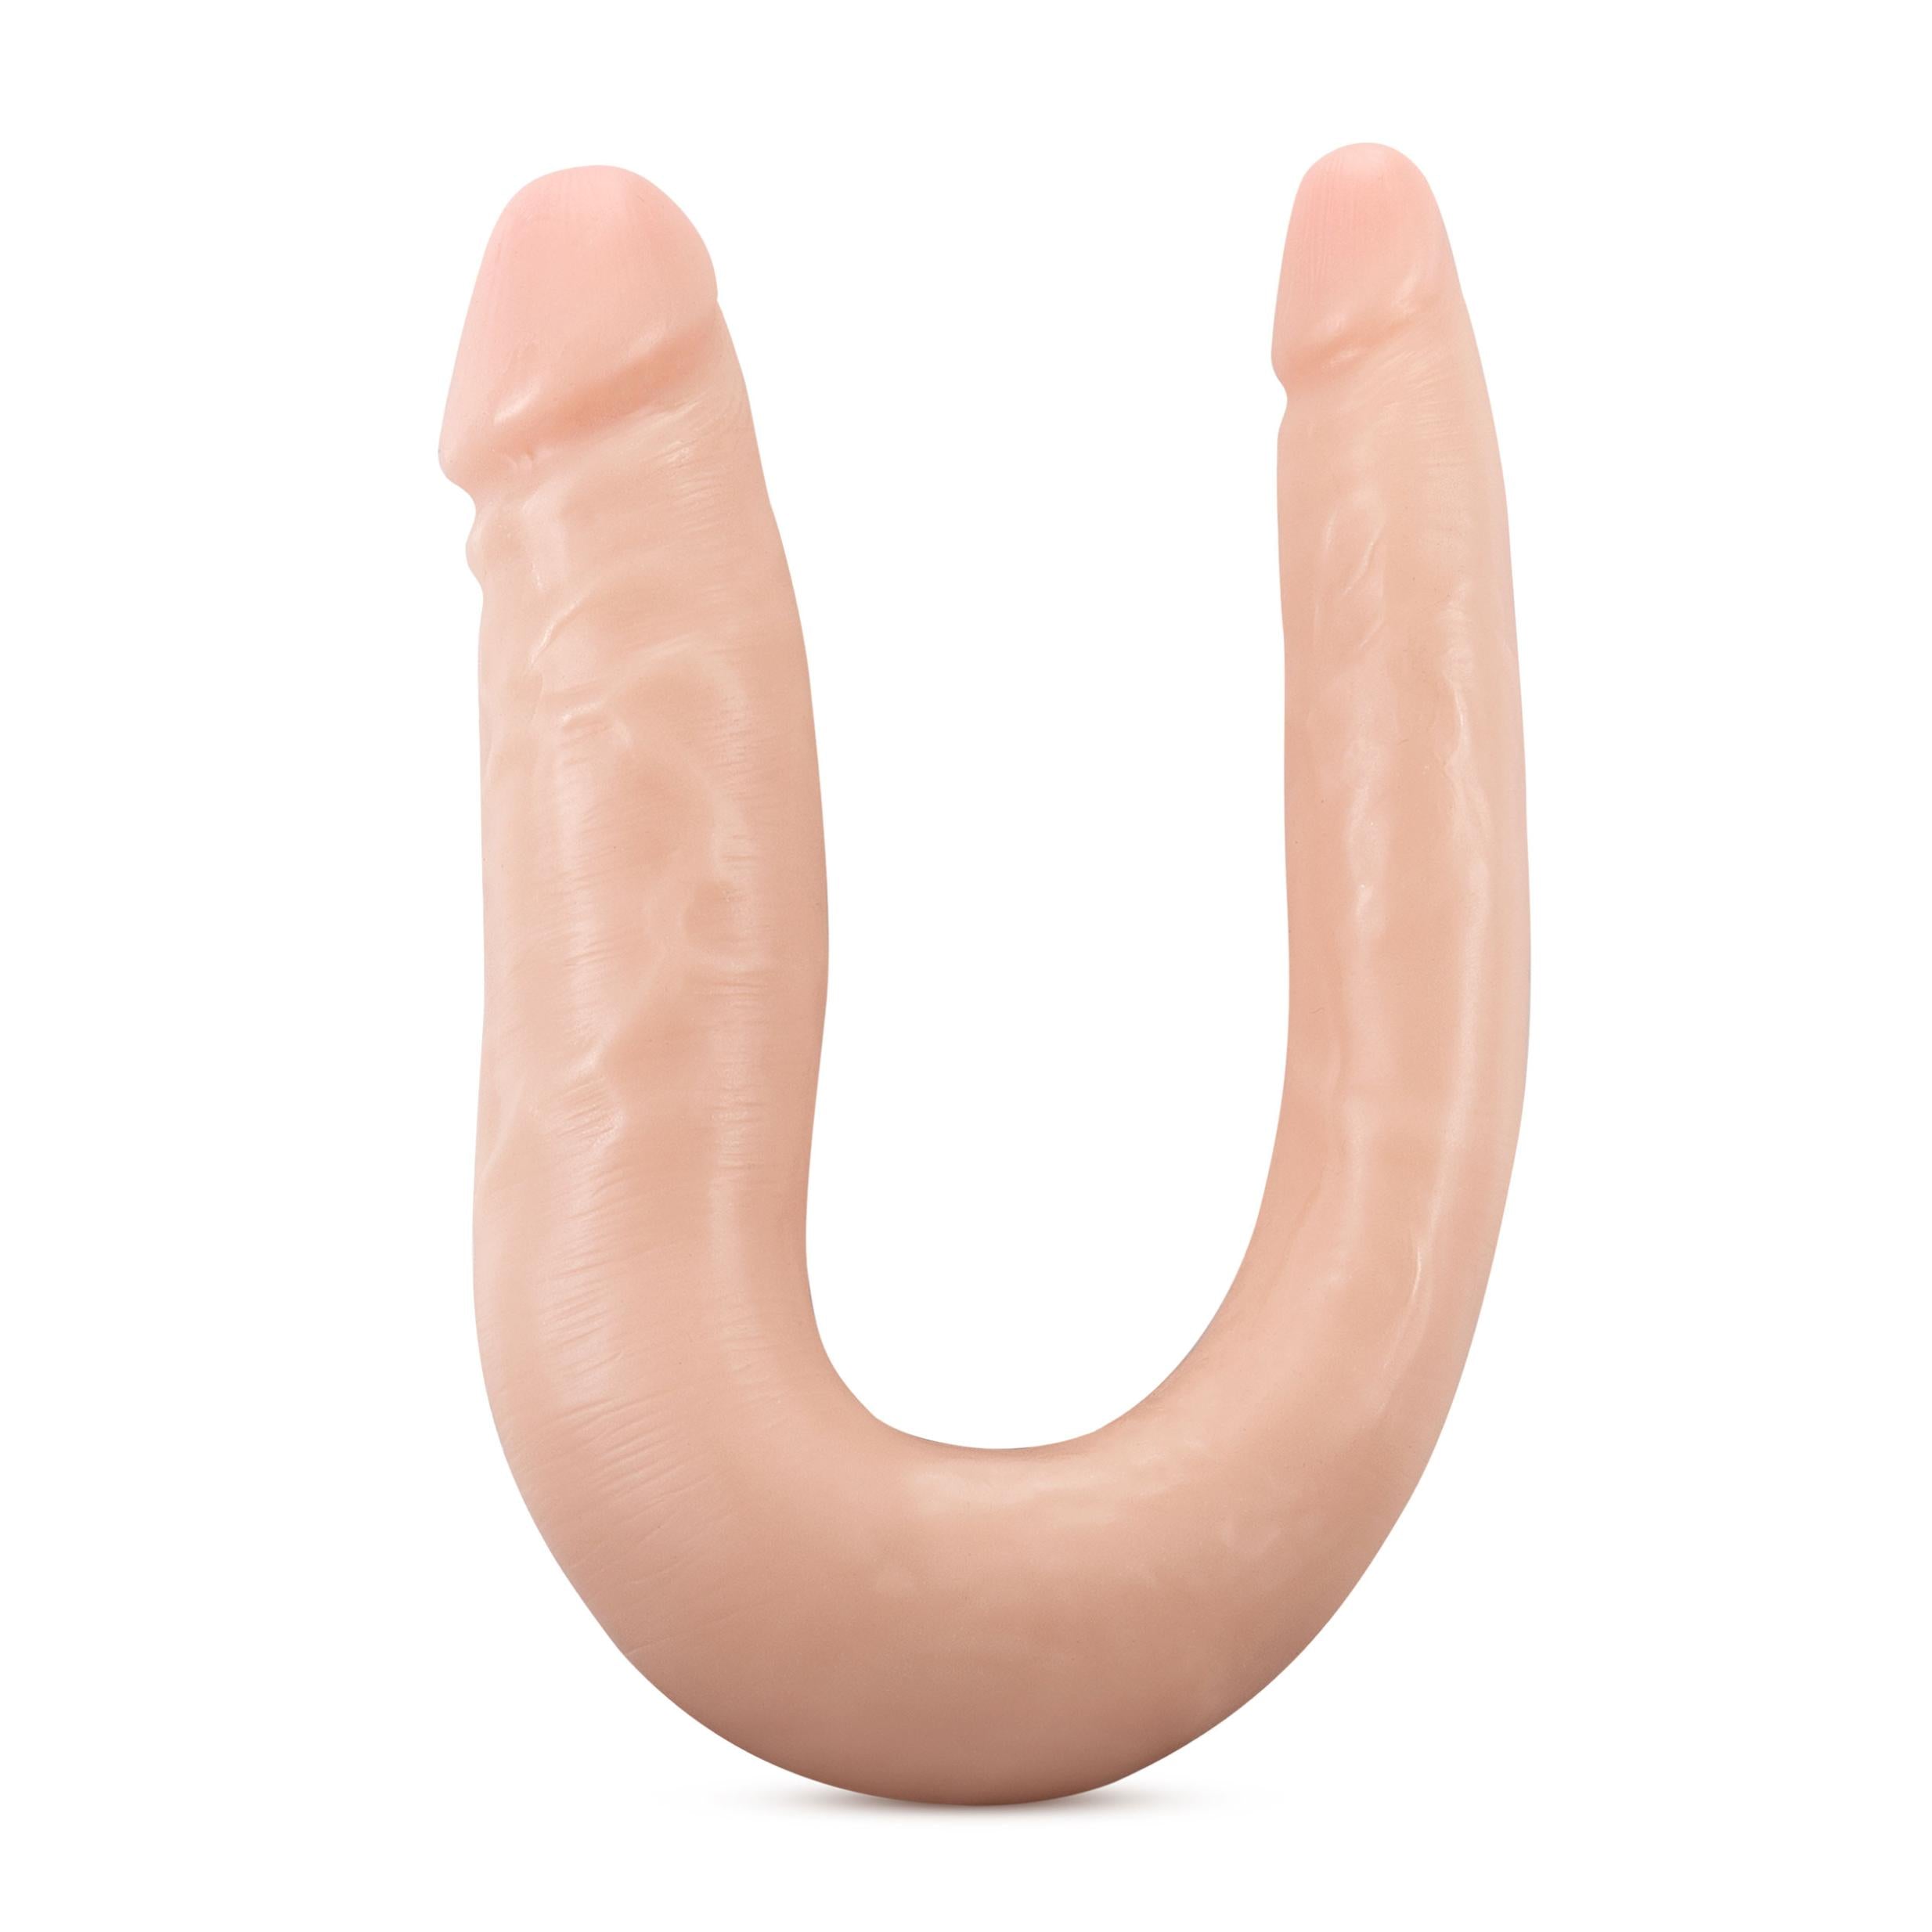 Dr. Skin Silicone - Dr. Double - 12 Inch Double  Dong - Vanilla